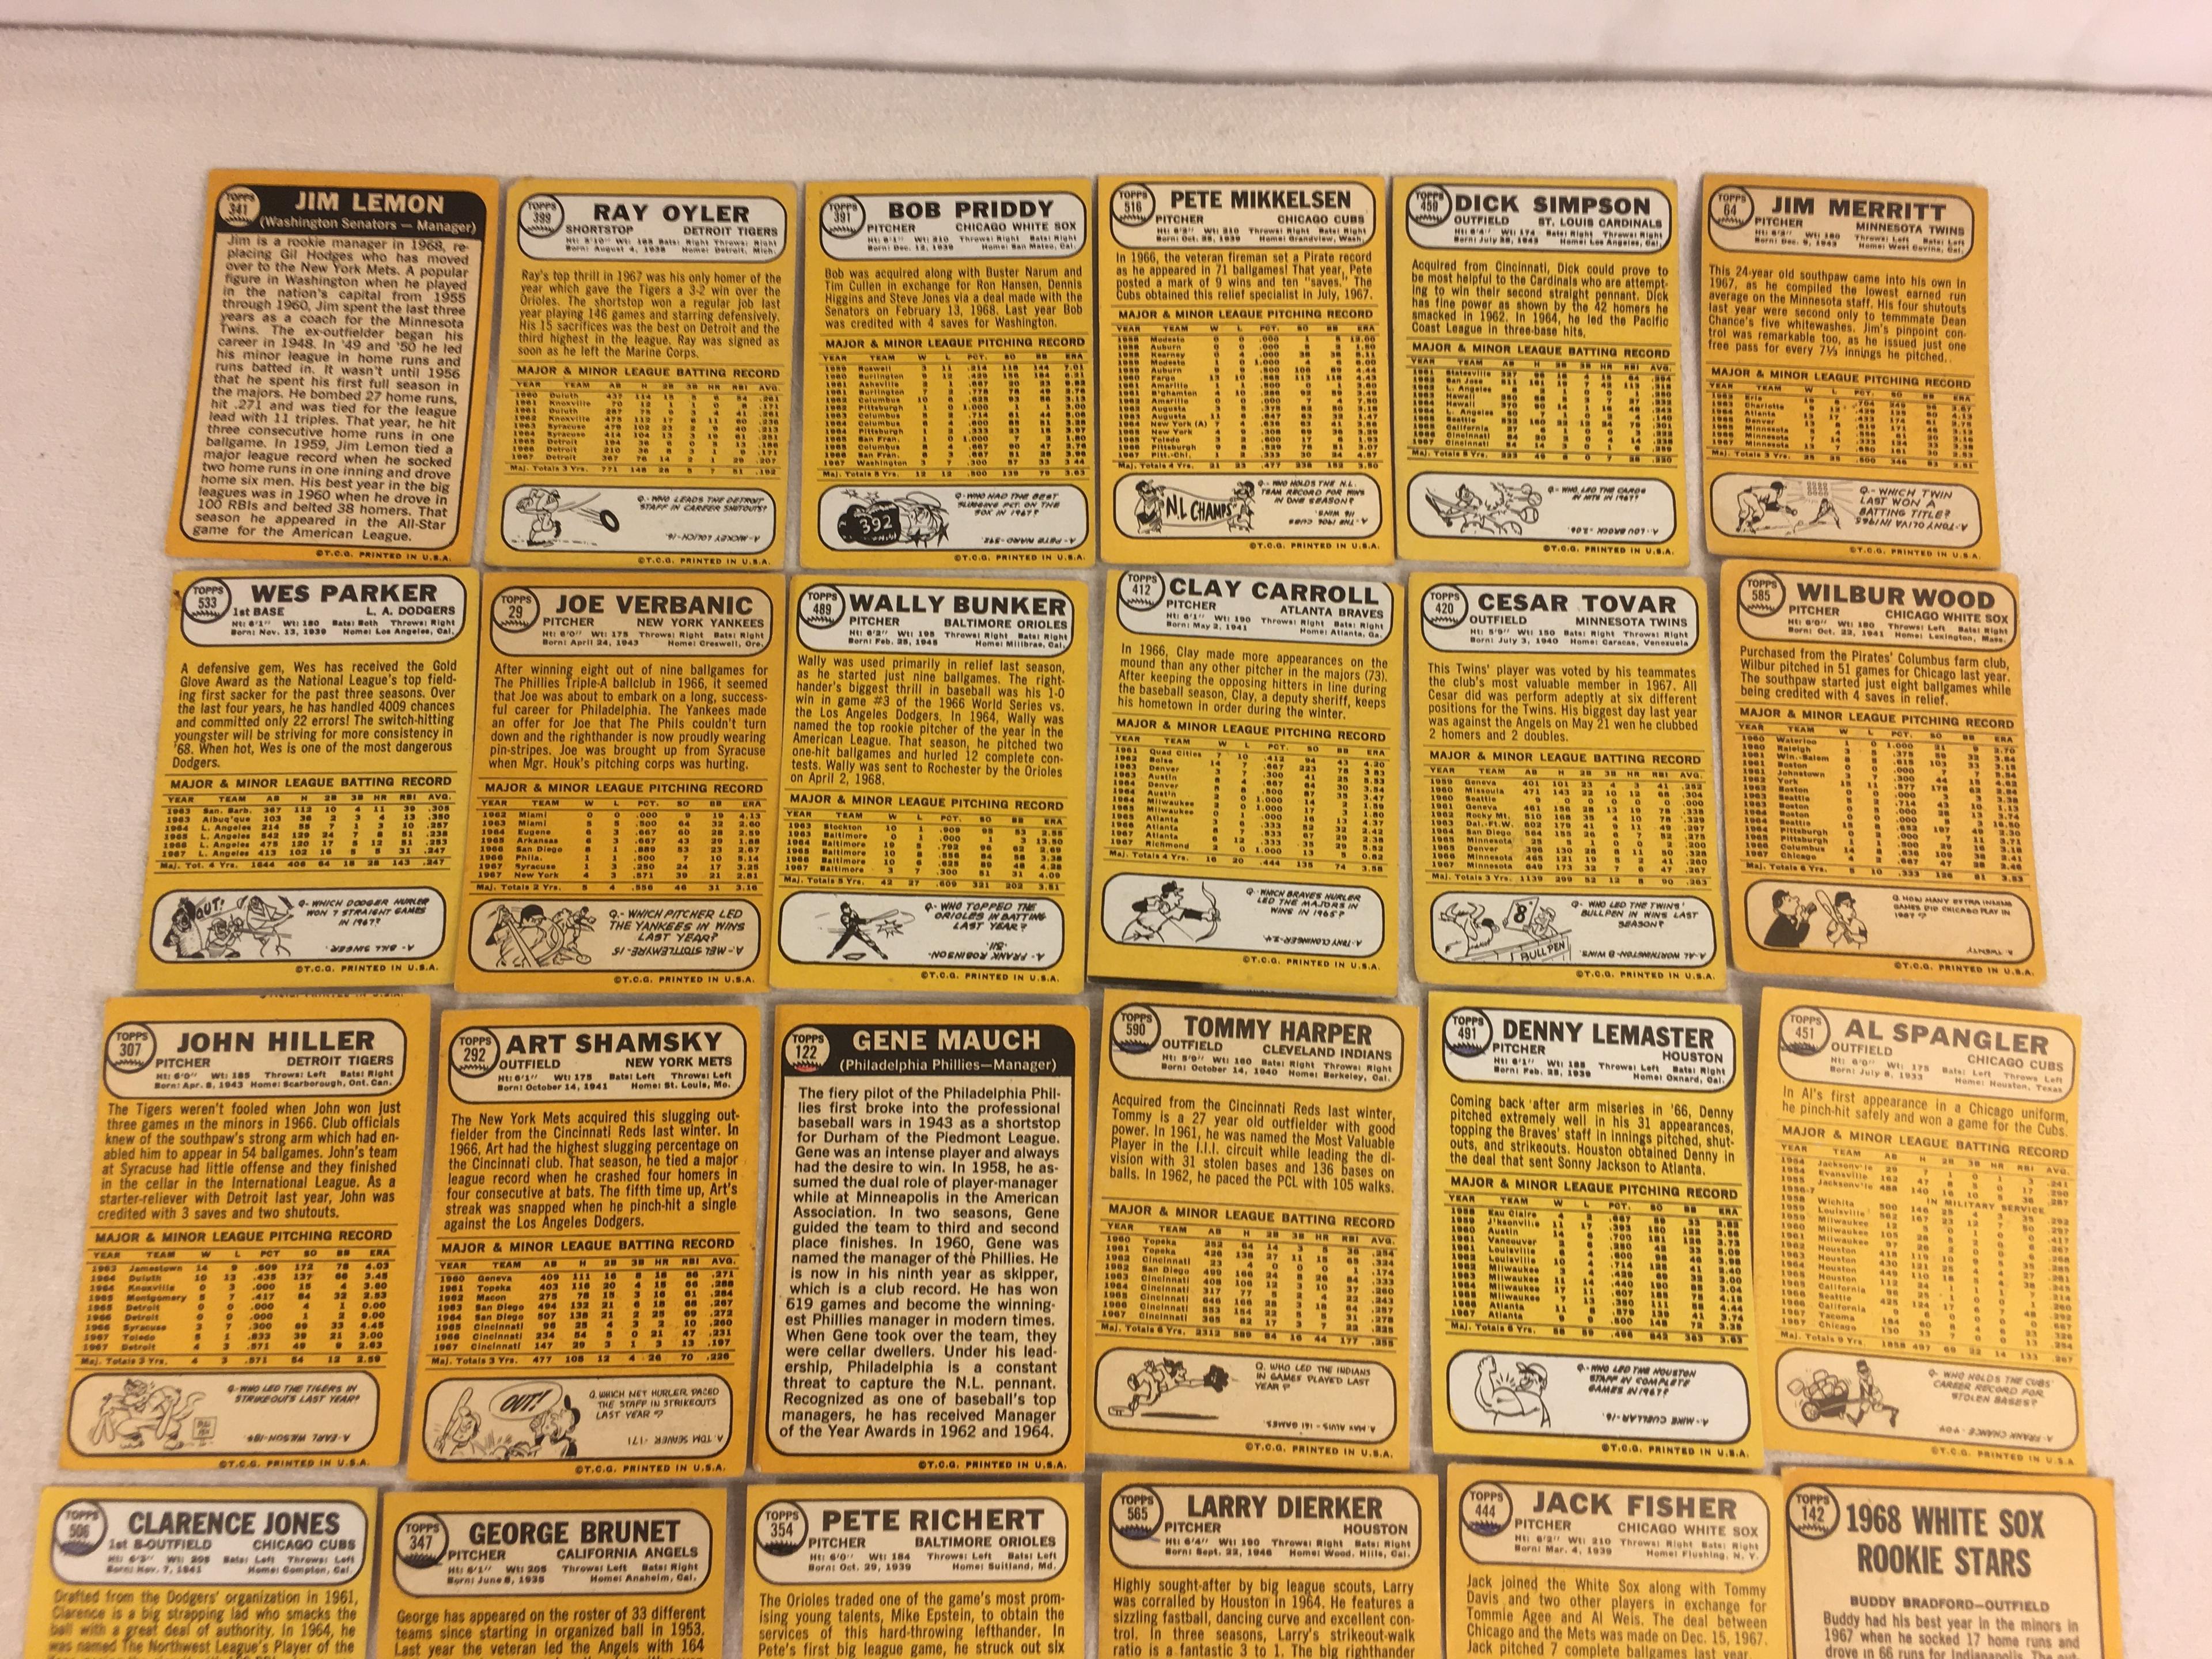 Lot of 30 Pcs Loose Collector Vintage Sport Trading Baseball Cards Assorted Players & Cards